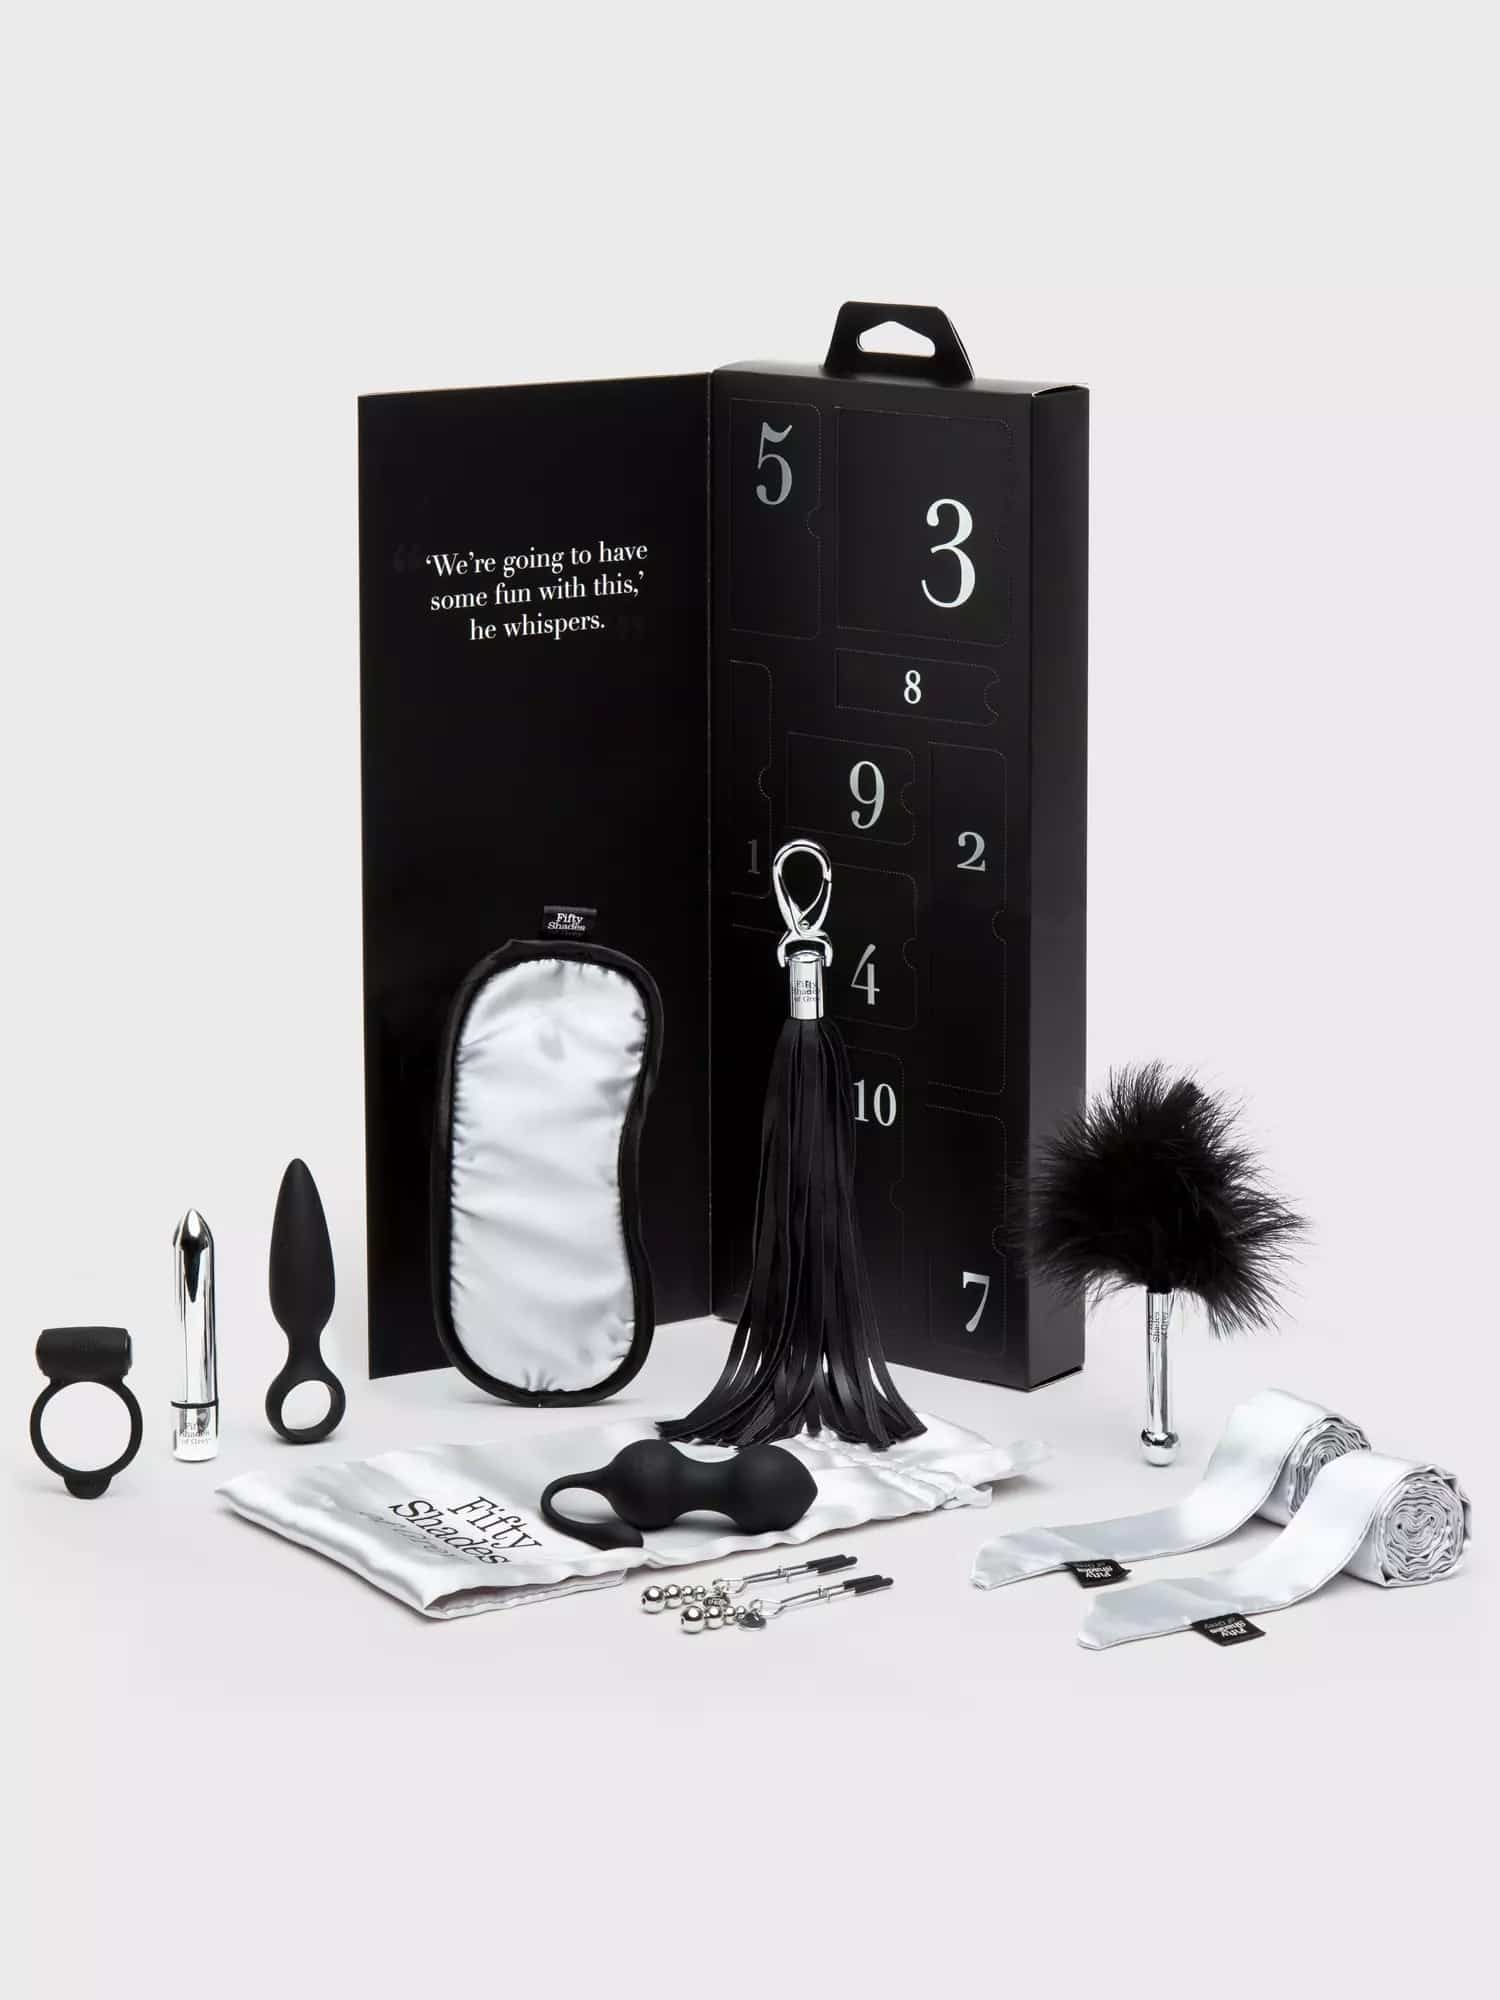 Fifty Shades of Grey "Pleasure Overload" Gift Set